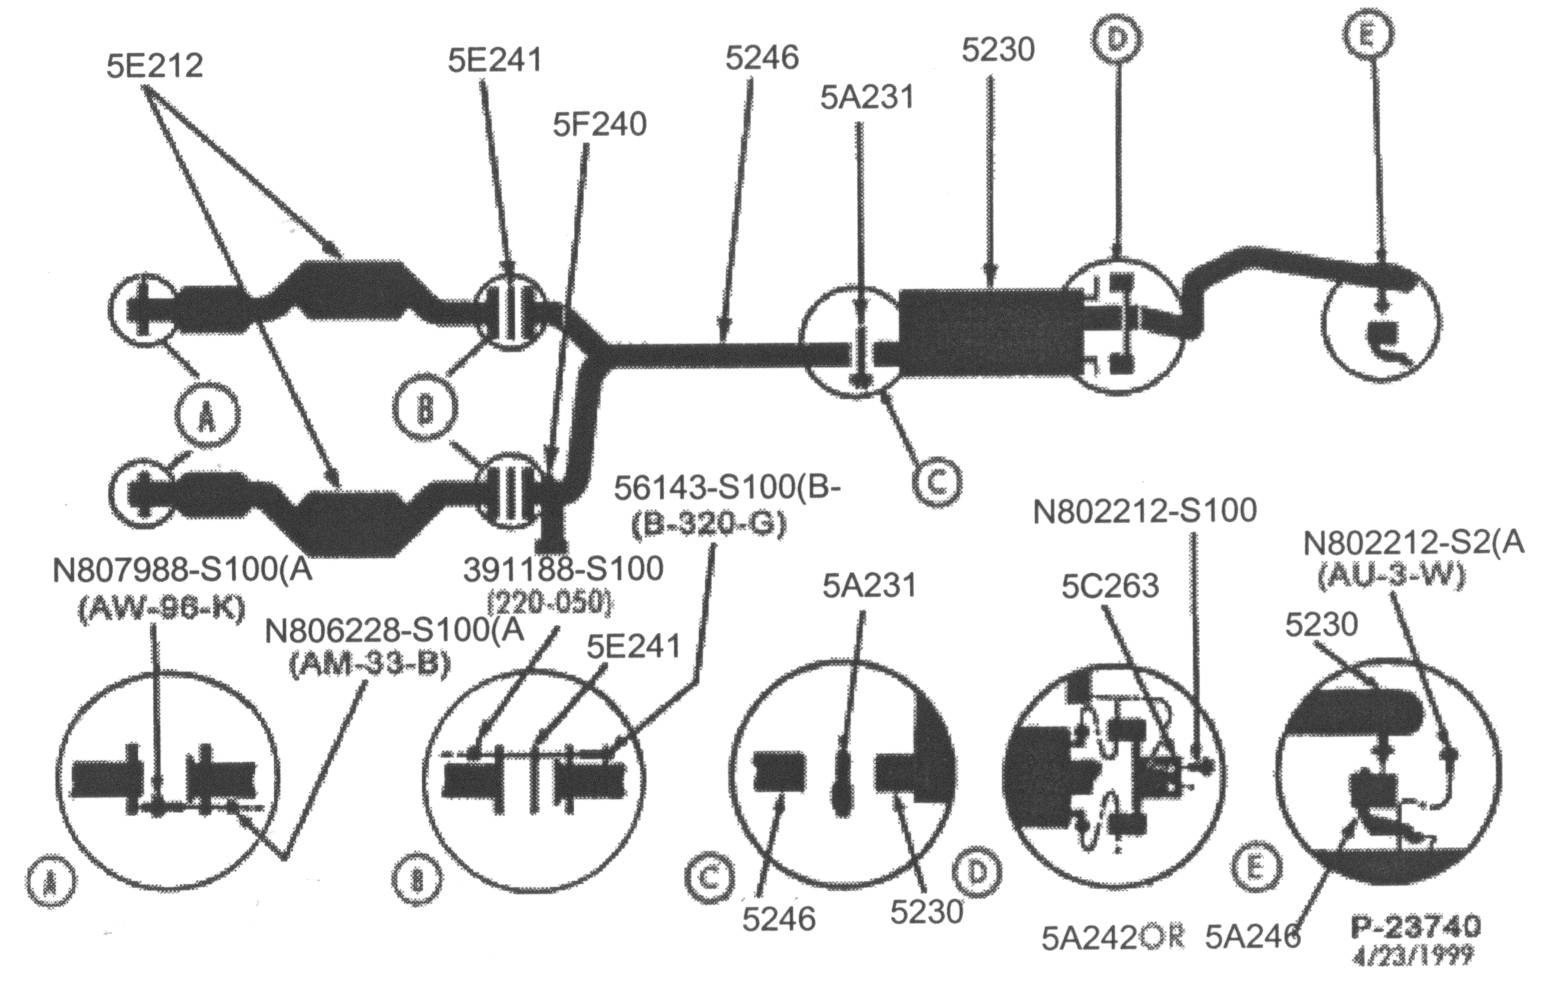 Diagram Of Car Exhaust System ford Crown Victoria Police Interceptor Exhaust Parts Of Diagram Of Car Exhaust System